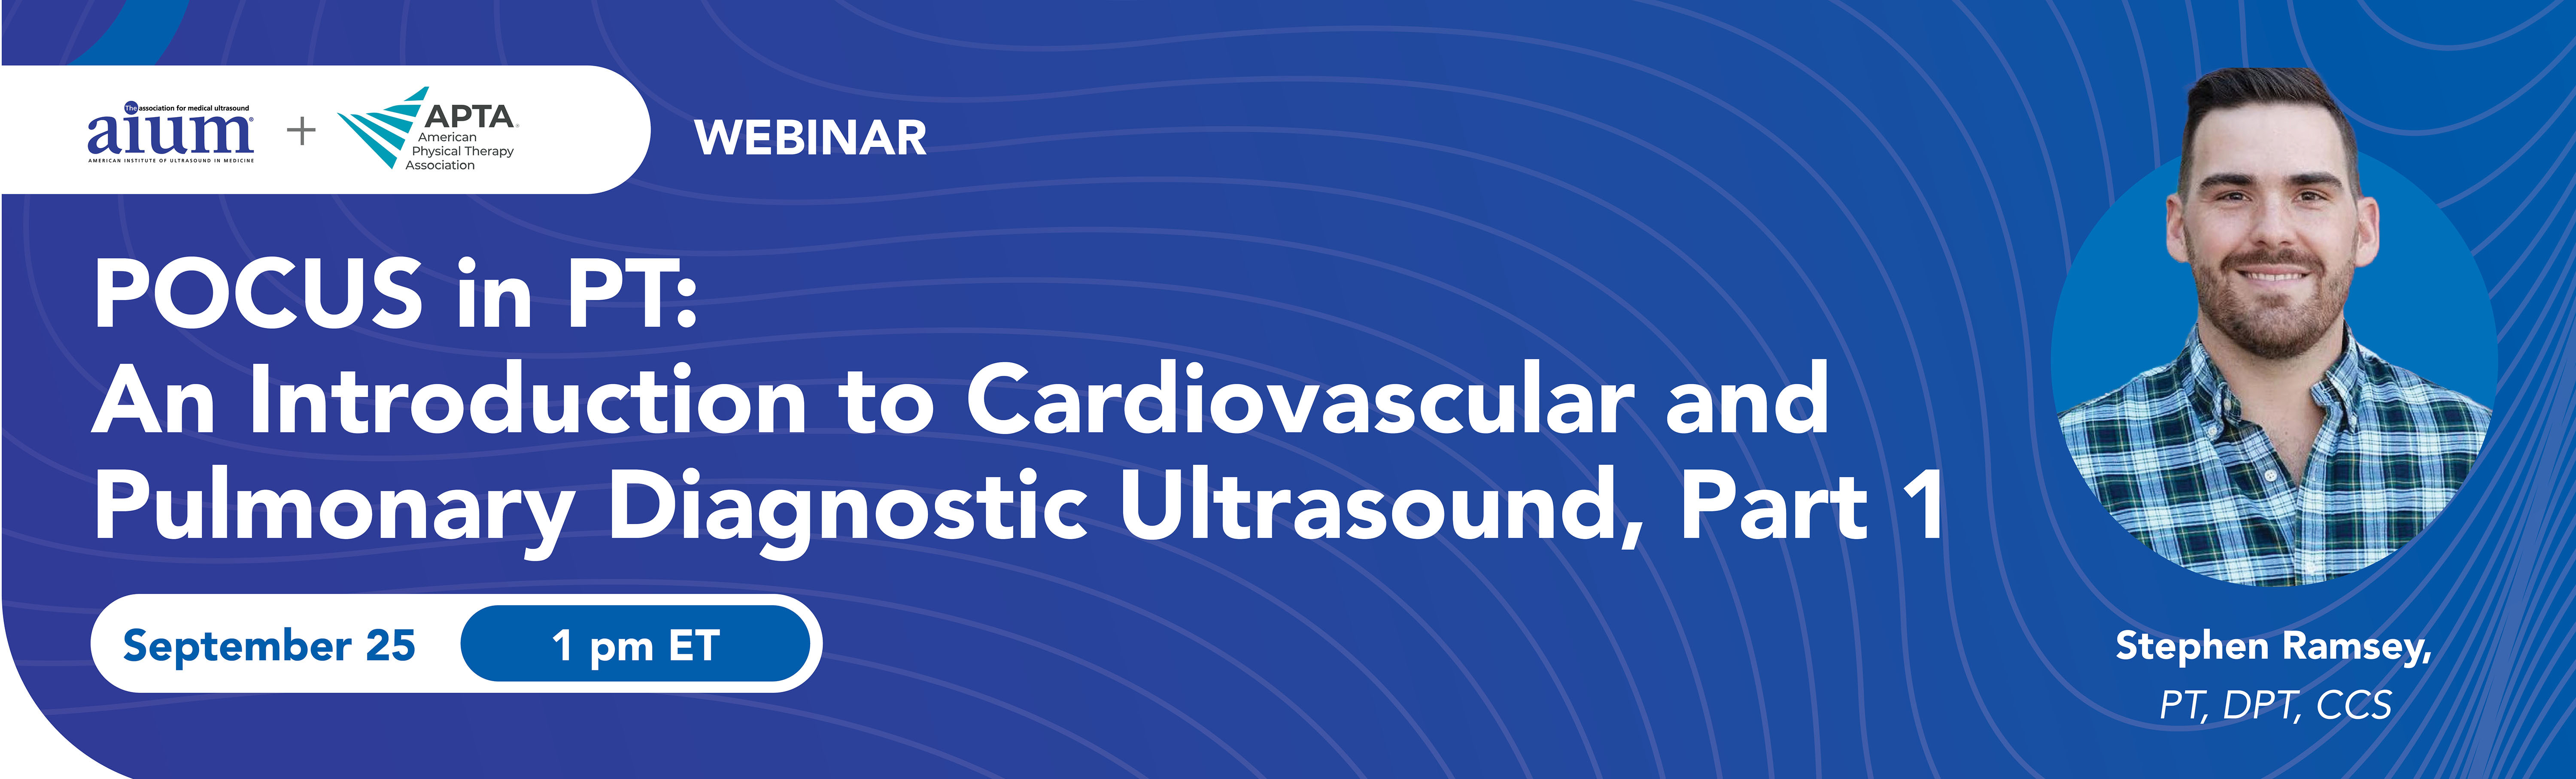 POCUS in PT: An Introduction to Cardiovascular and Pulmonary Diagnostic Ultrasound, Part 1